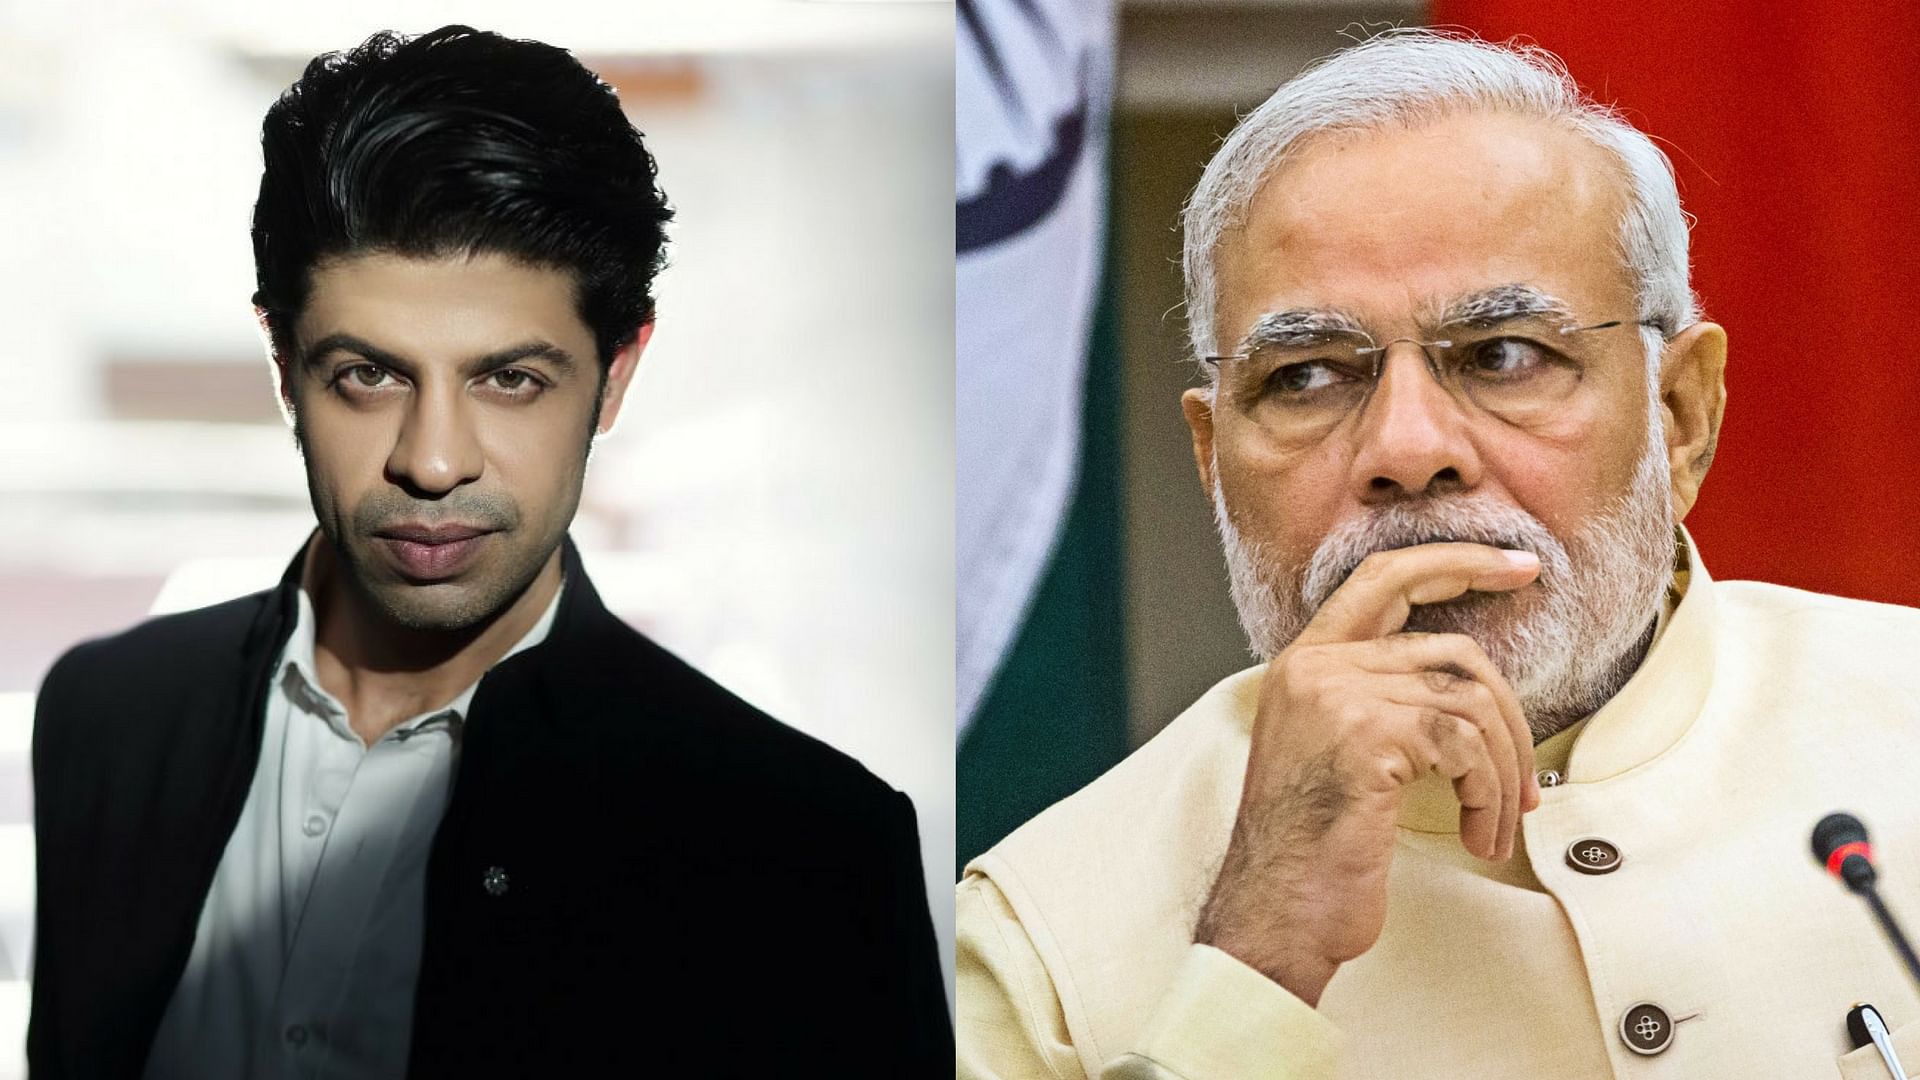 Ssumier Pasricha asks Prime Minister Narendra Modi to speak out on rape issues. (Picture courtesy: Twitter/ Indianwikimedia / DailyO_)